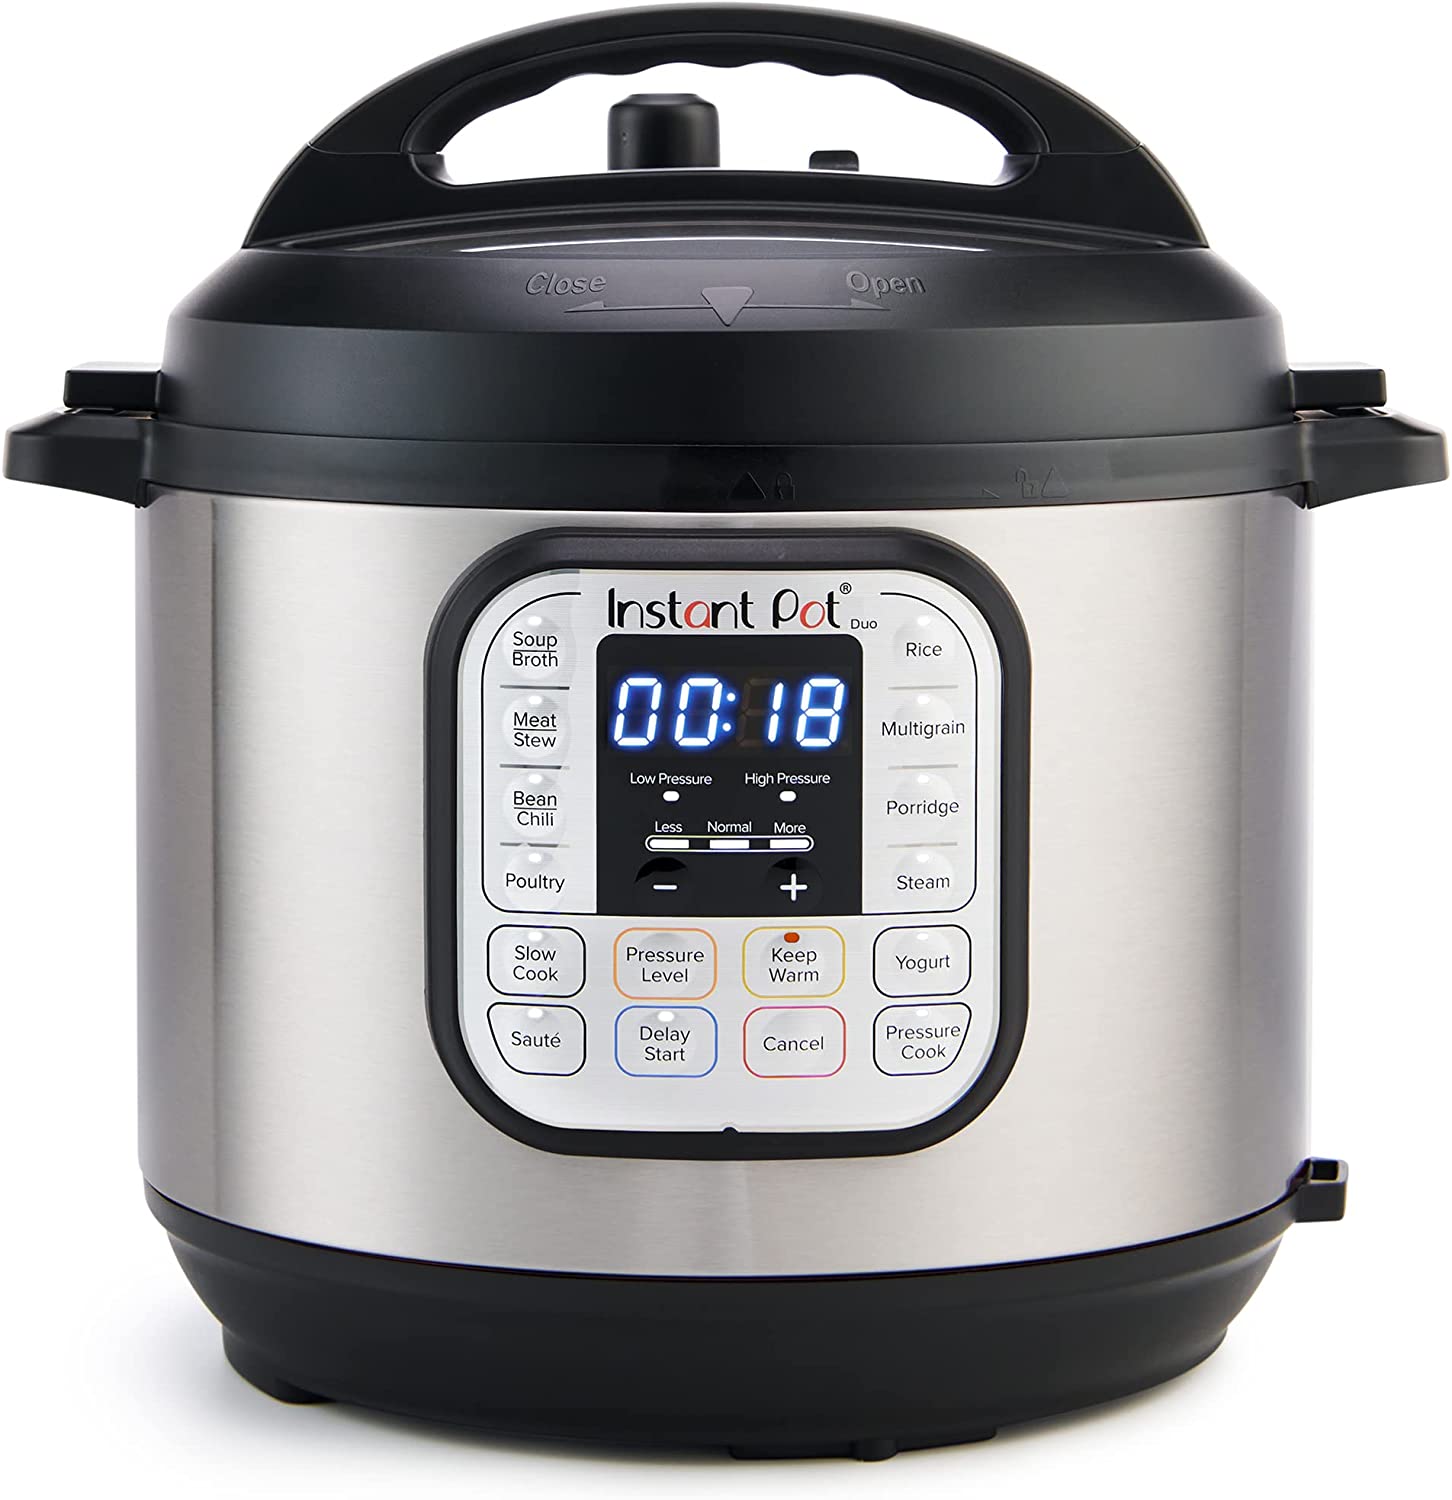 https://bigbigmart.com/wp-content/uploads/2023/07/Instant-Pot-Duo-7-in-1-Electric-Pressure-Cooker-Slow-Cooker-Rice-Cooker-Steamer-Saute-Yogurt-Maker-Warmer-Sterilizer-Includes-Free-App-with-over-1900-Recipes-Stainless-Steel-3-Quart.jpg